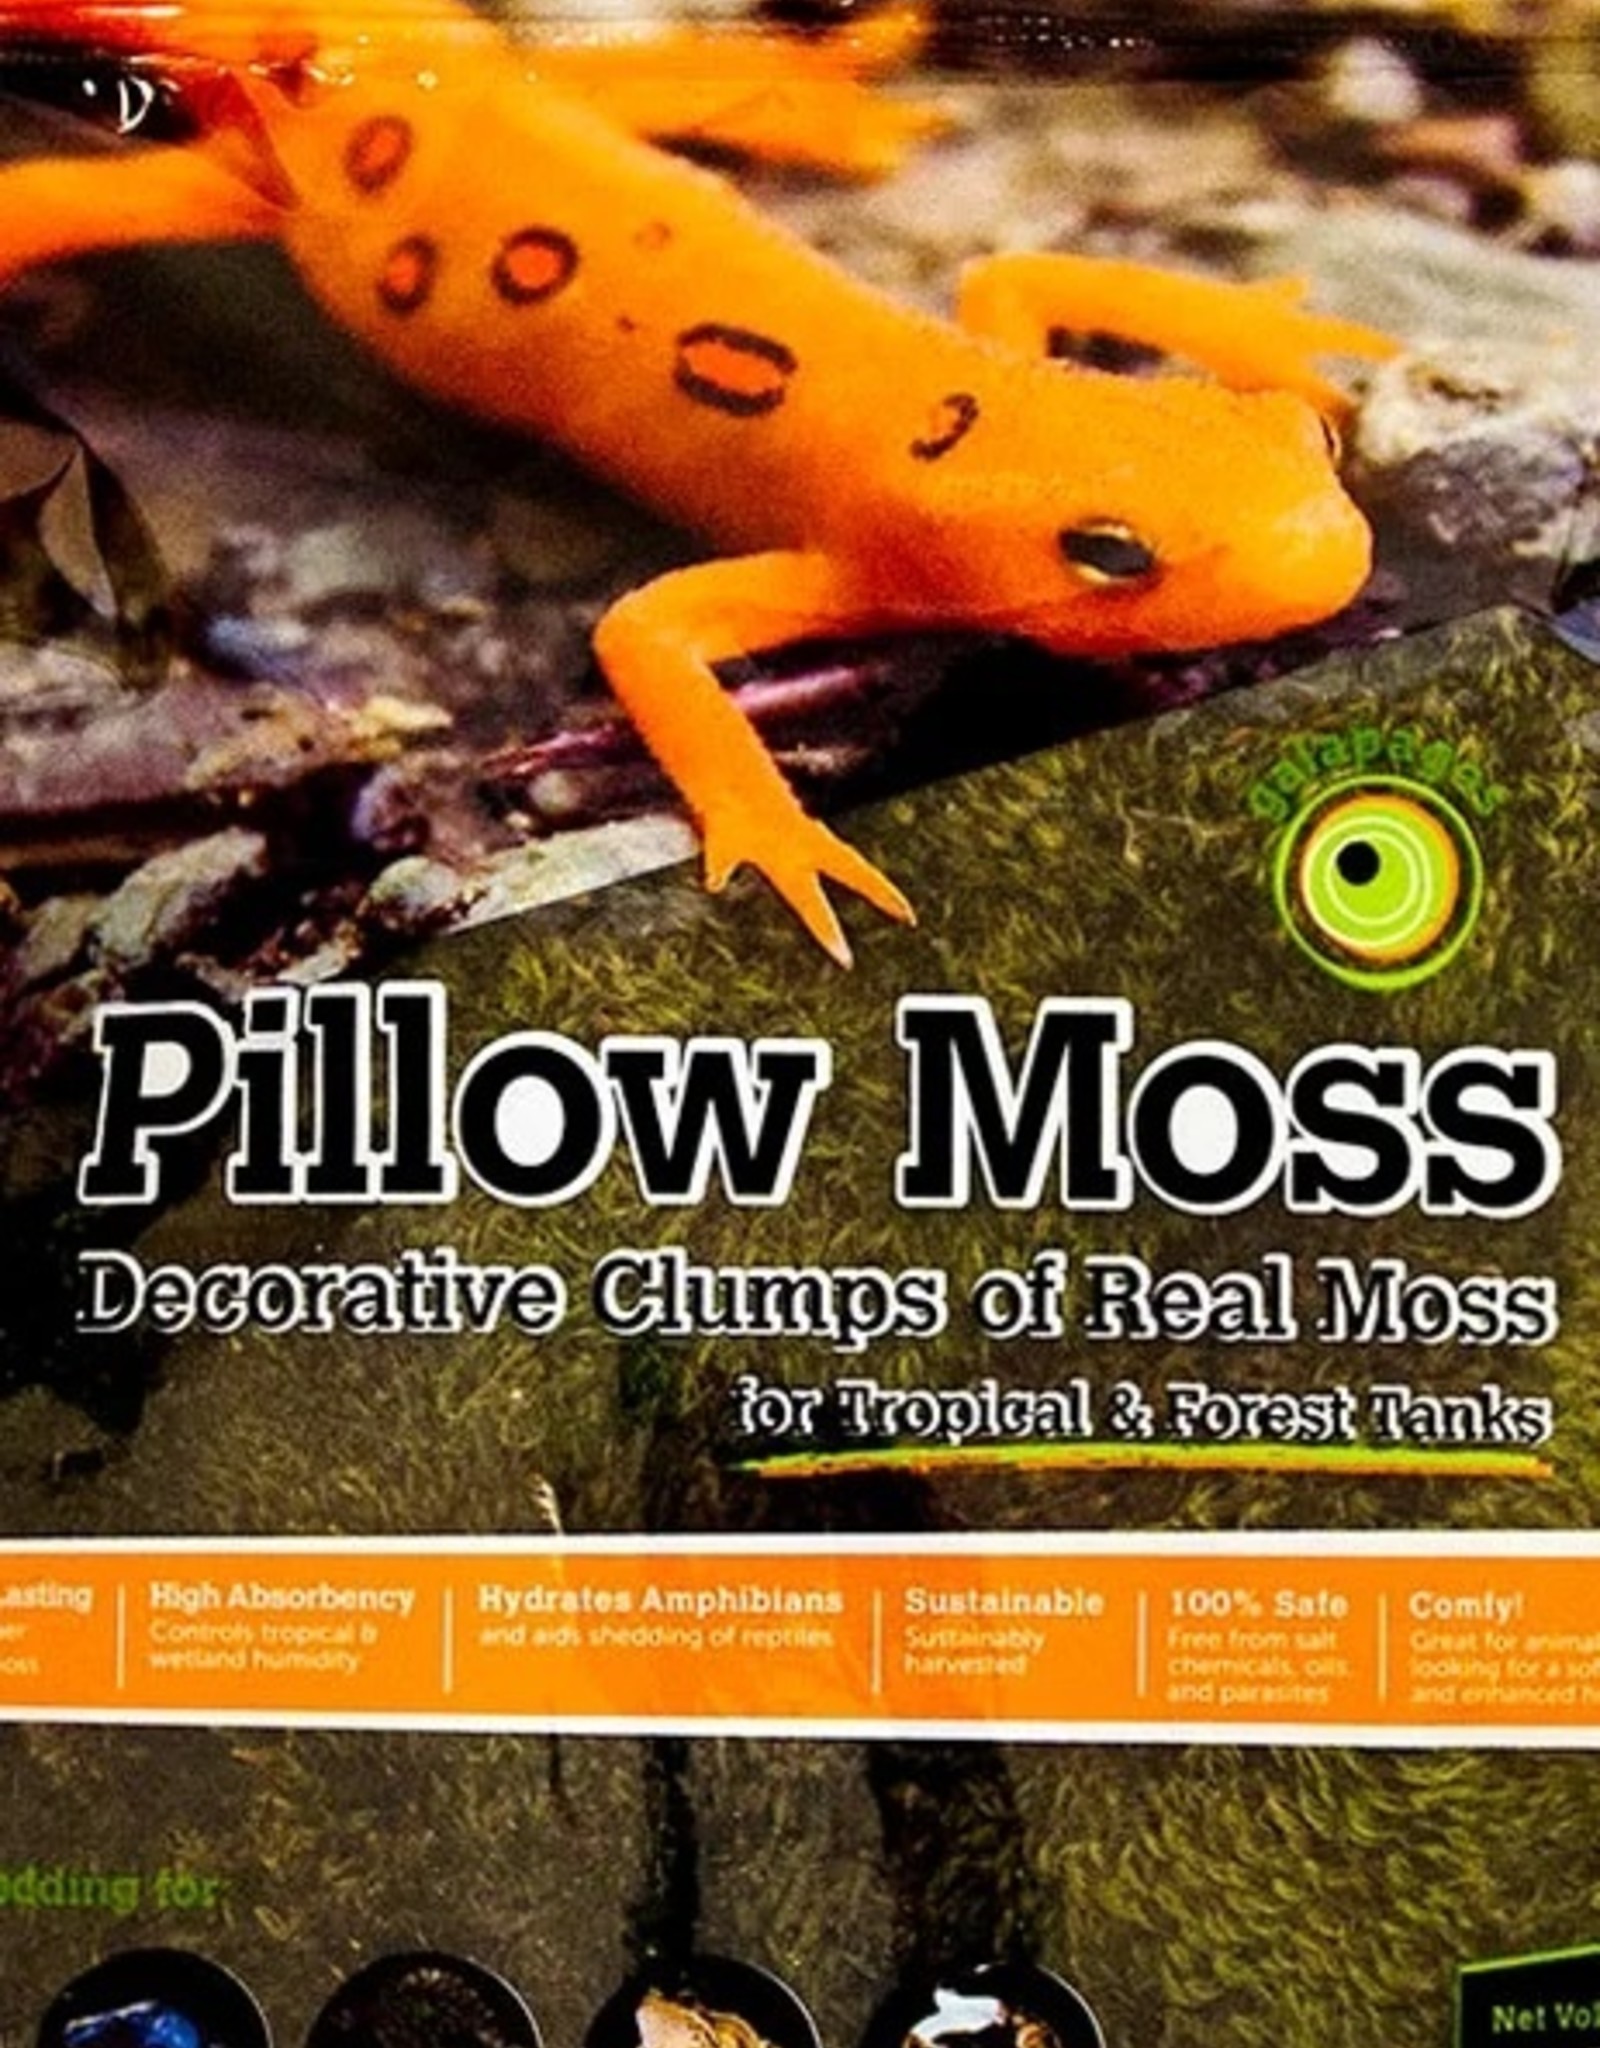 GALAPAGOS PILLOW MOSS GREEN 4 QT - Pickering Valley Feed & Farm Store